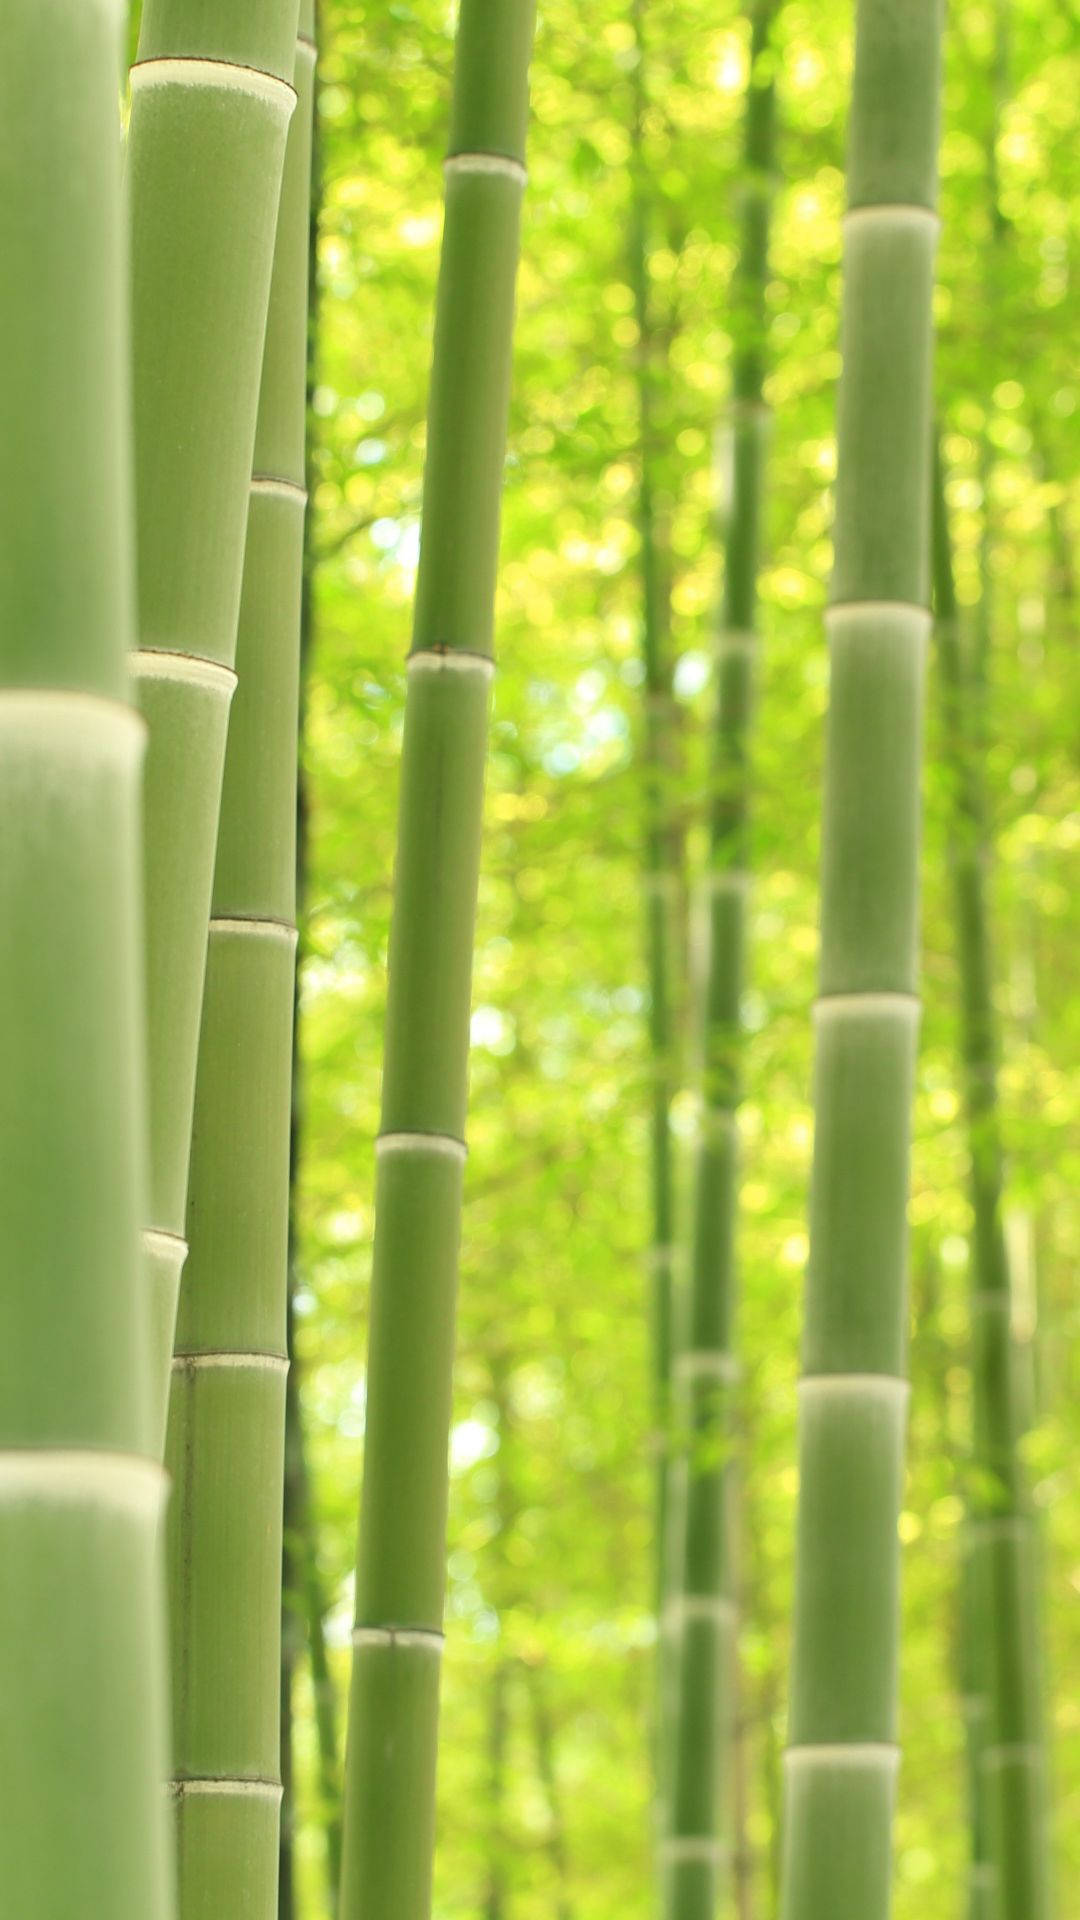 Bamboo Forest iPhone Poles Wallpaper